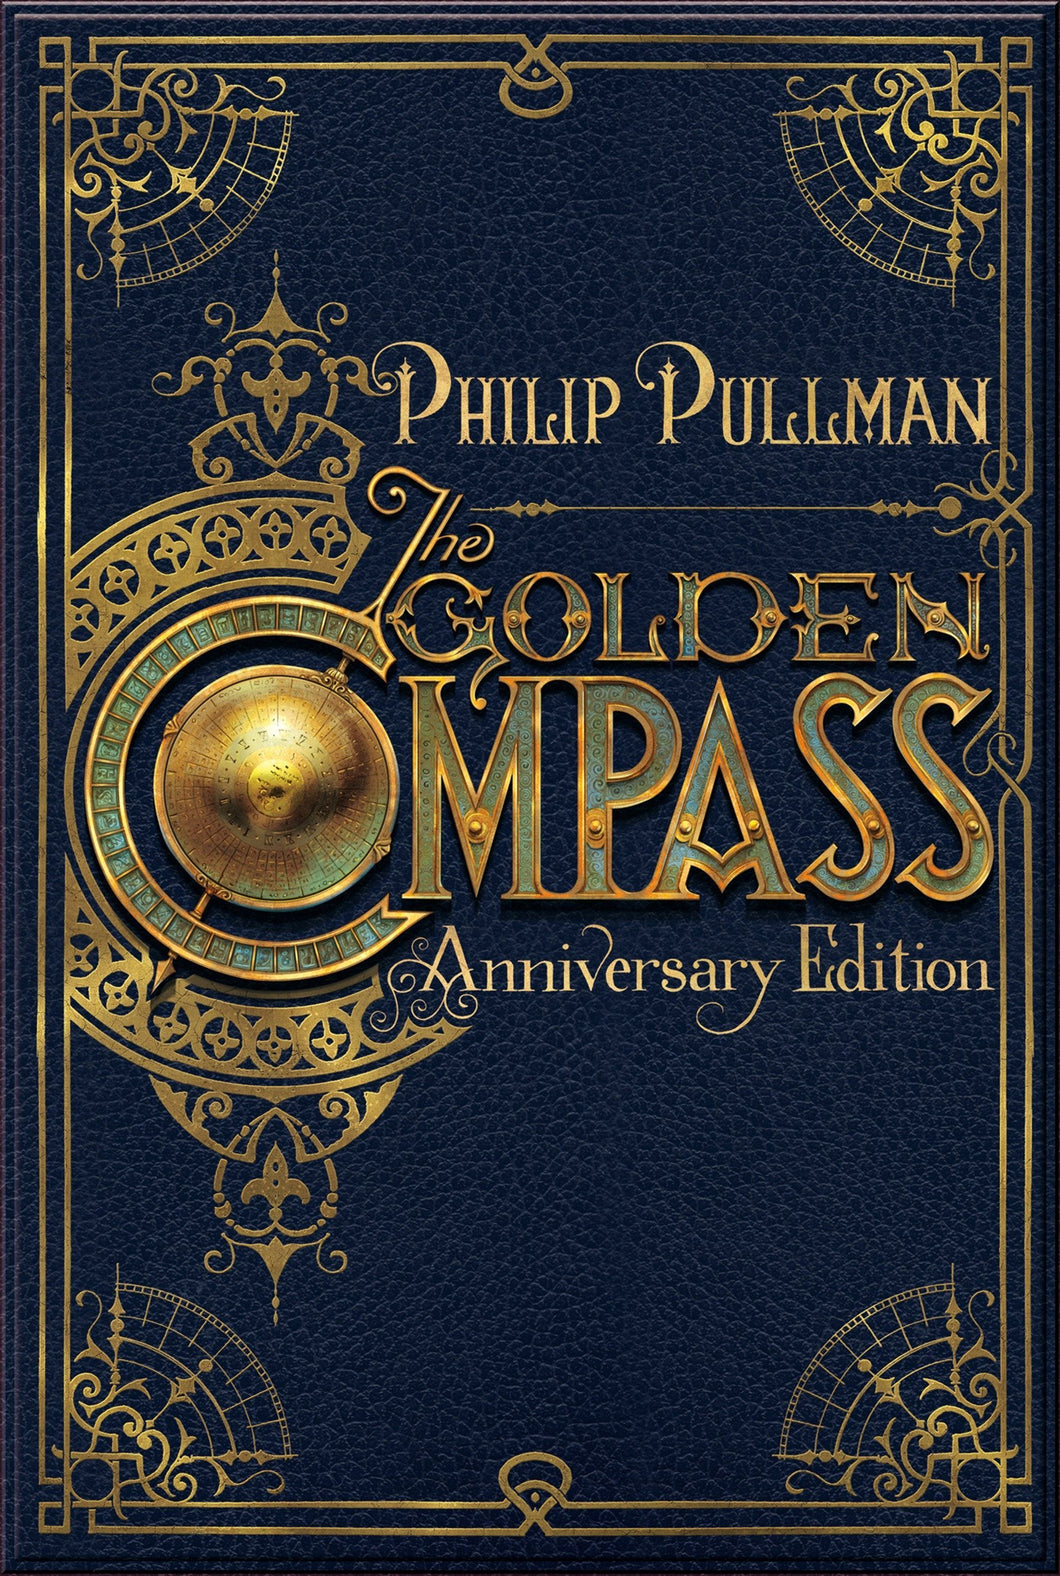 The Golden Compass, 20th Anniversary Edition (His Dark Materials)